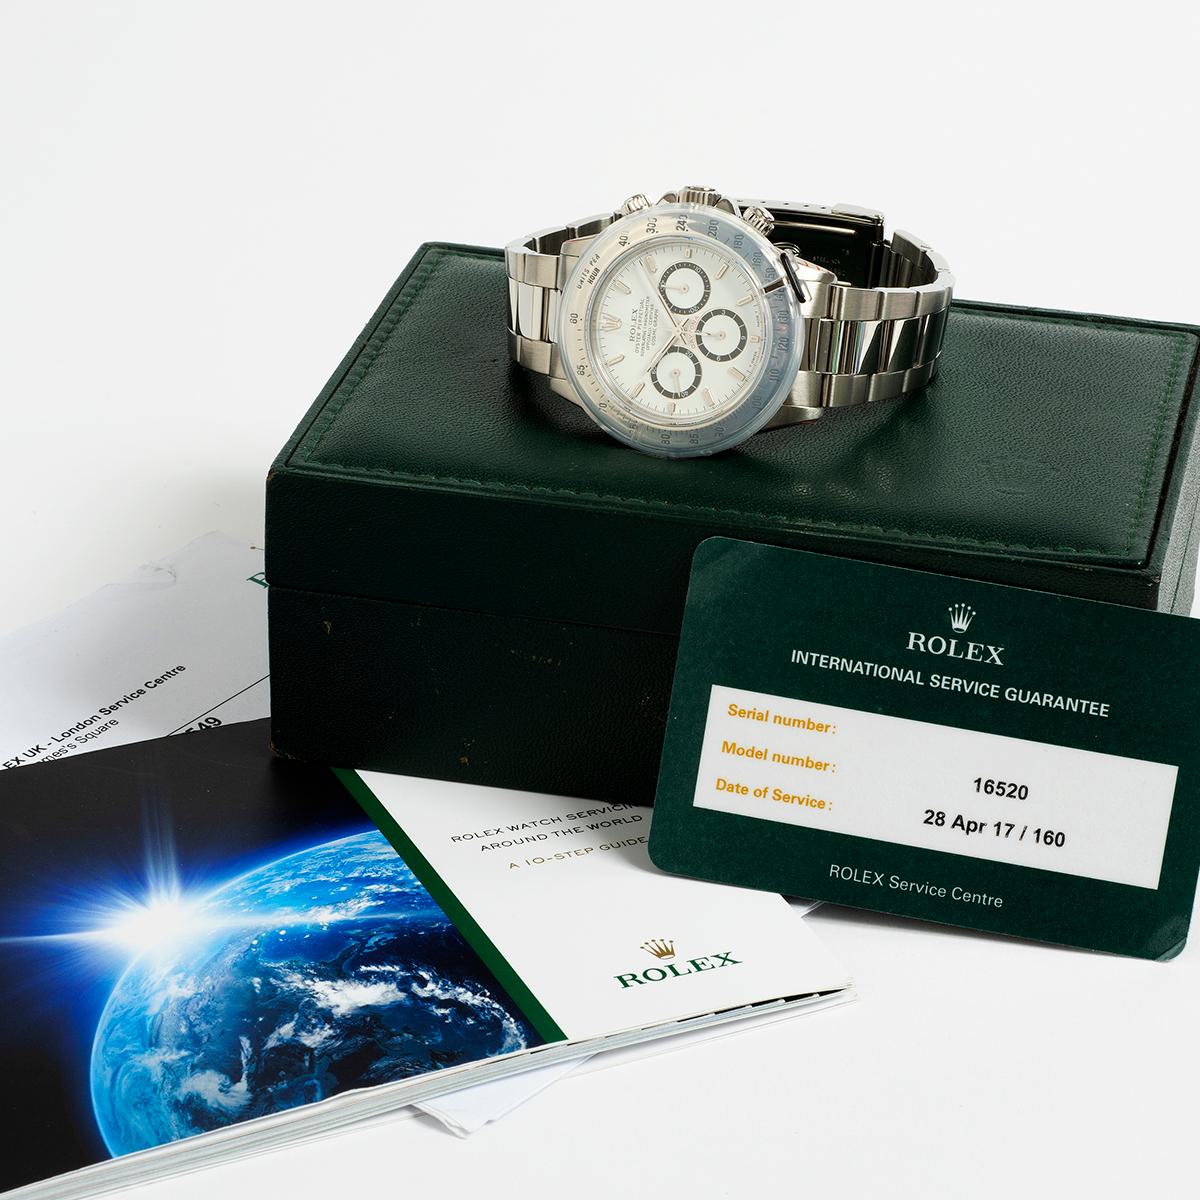 Rolex Daytona Ref 16520, Zenith Movement and White Dial with 'Inverted Six' 4